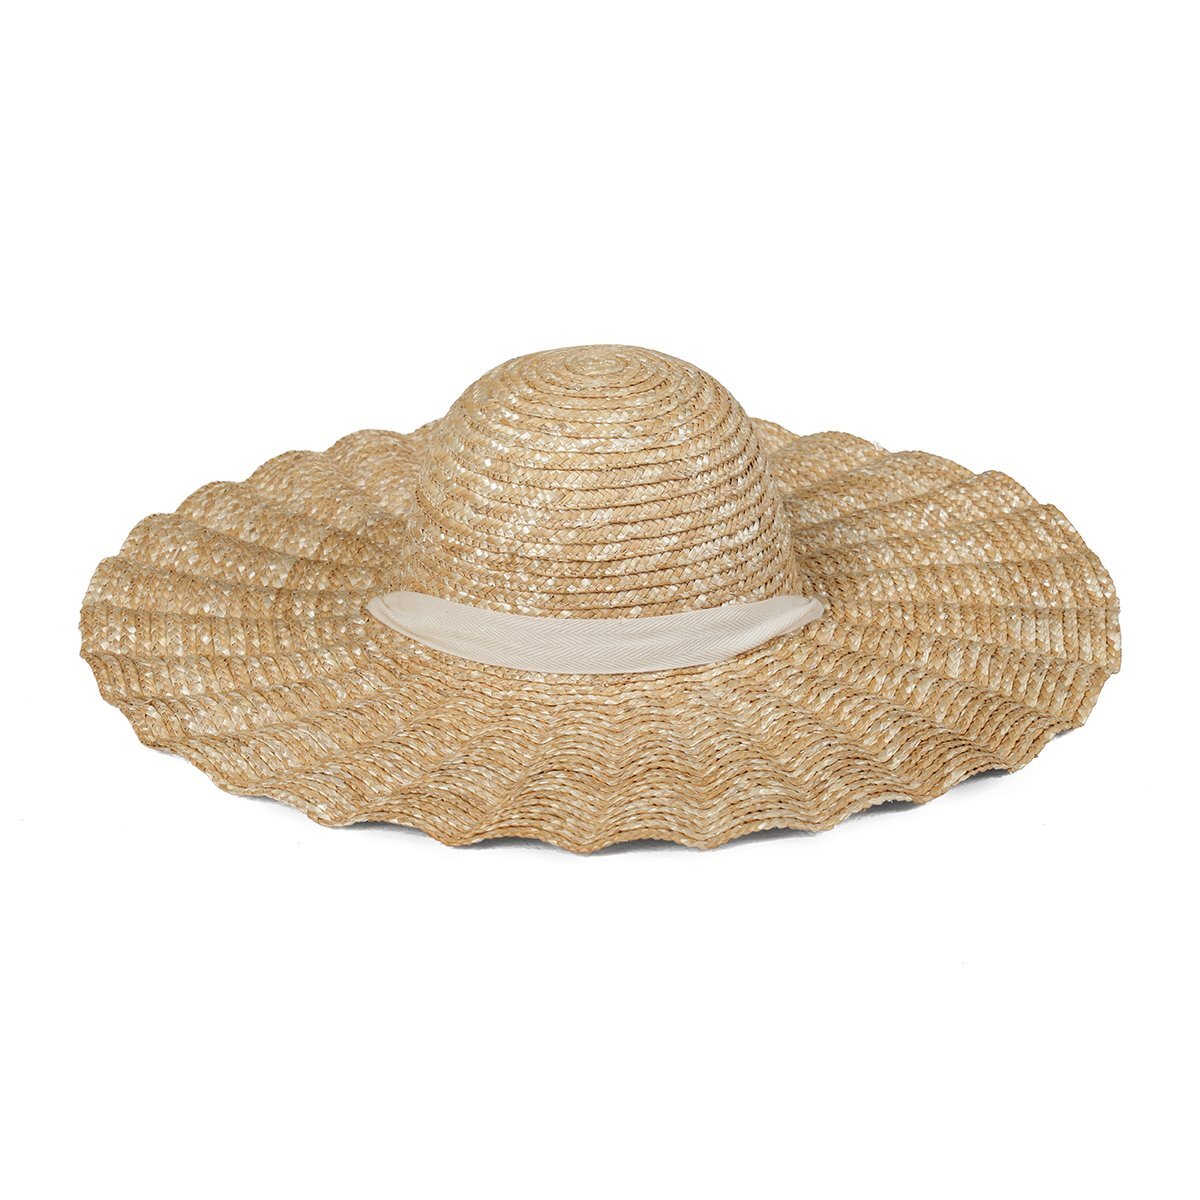 Scalloped-Dolce-Hat-1-isolate.jpg